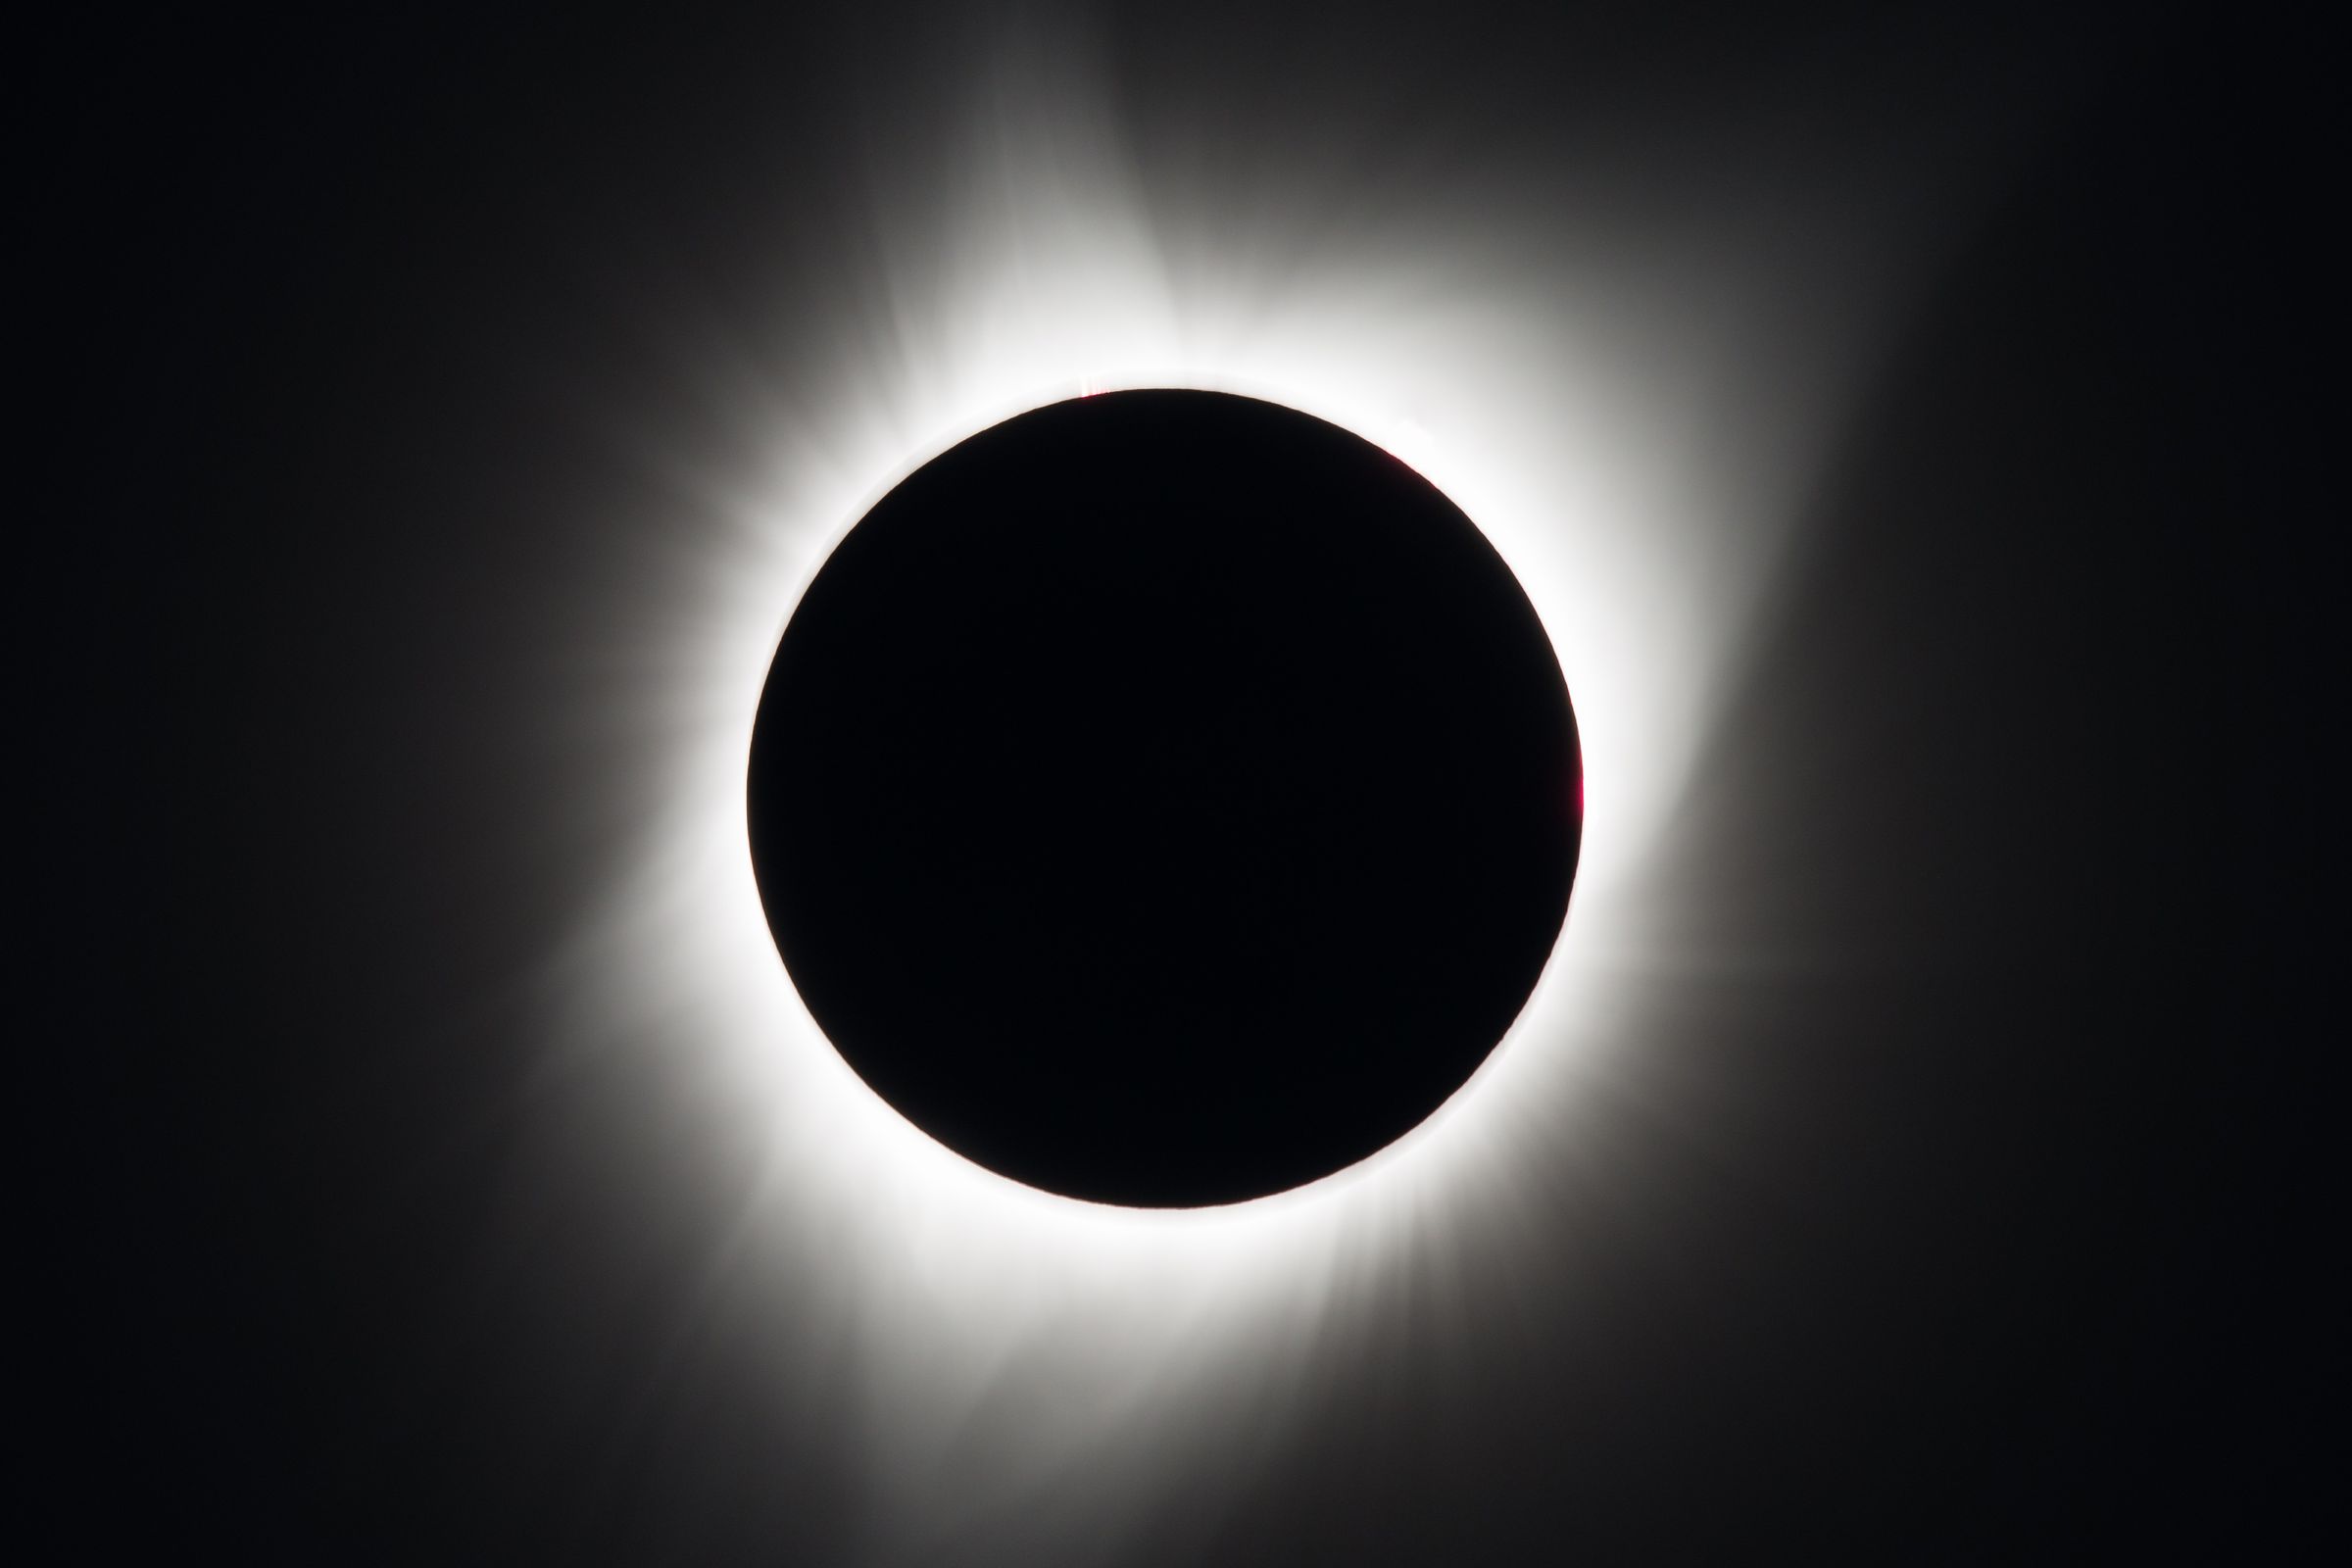 The August 21st total solar eclipse seen from Madras, Oregon.